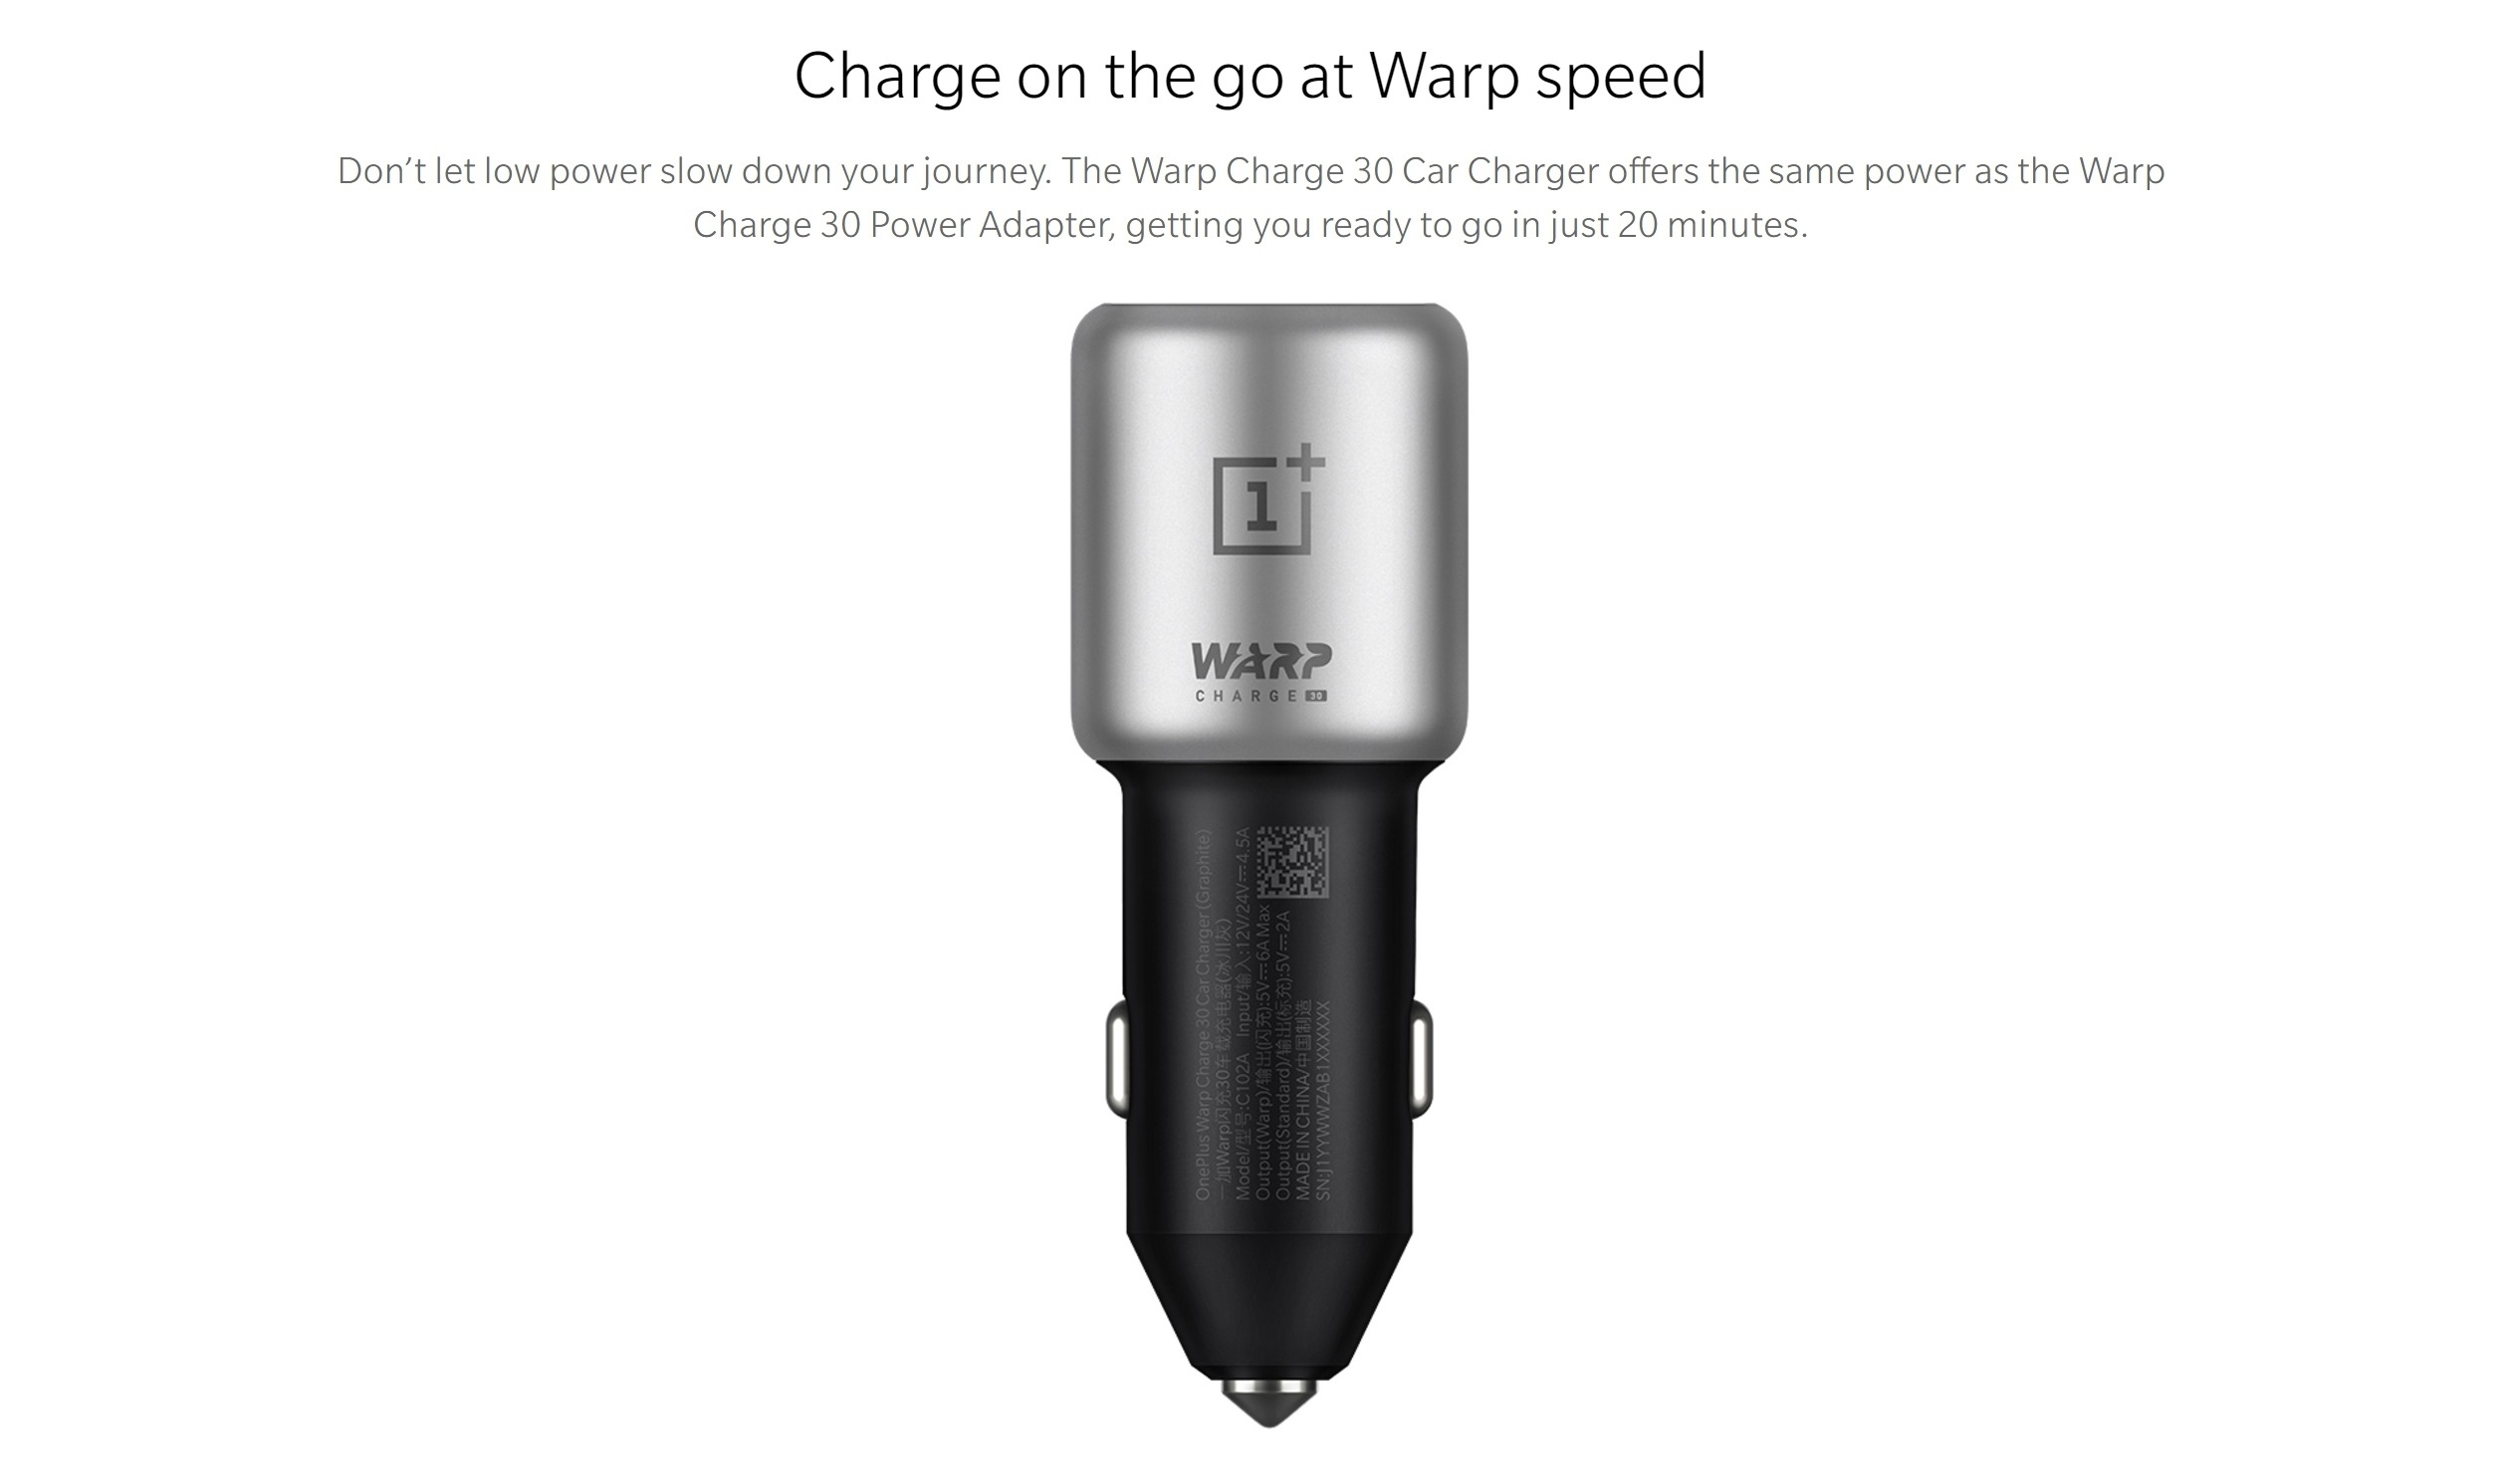 OnePlus Warp Charge 30 Car Charger